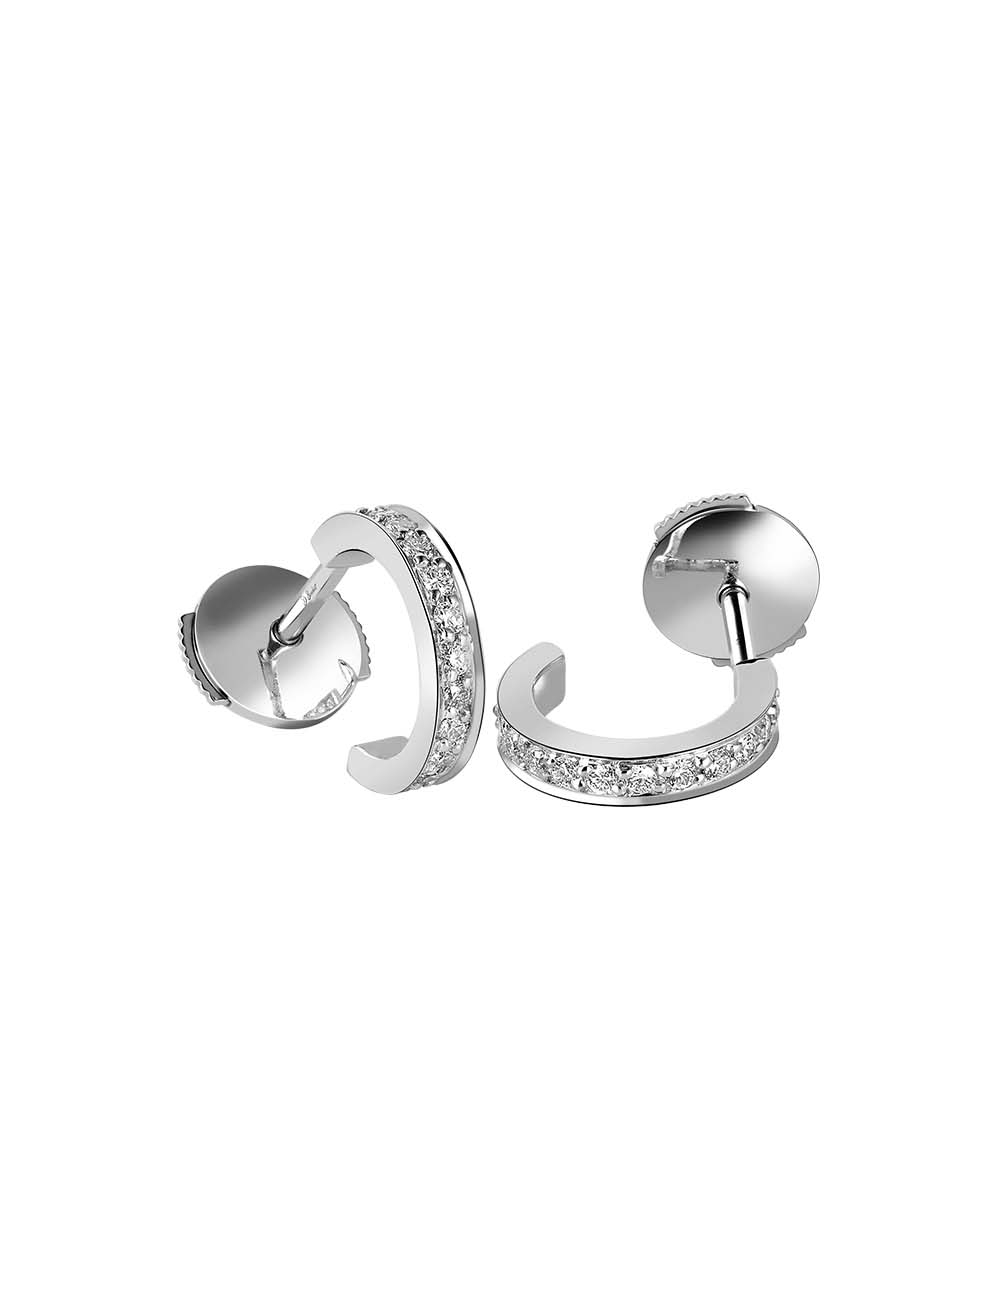 D.Bachet Half Hoop Earrings in gold with diamonds, symbolizing love and elegance.